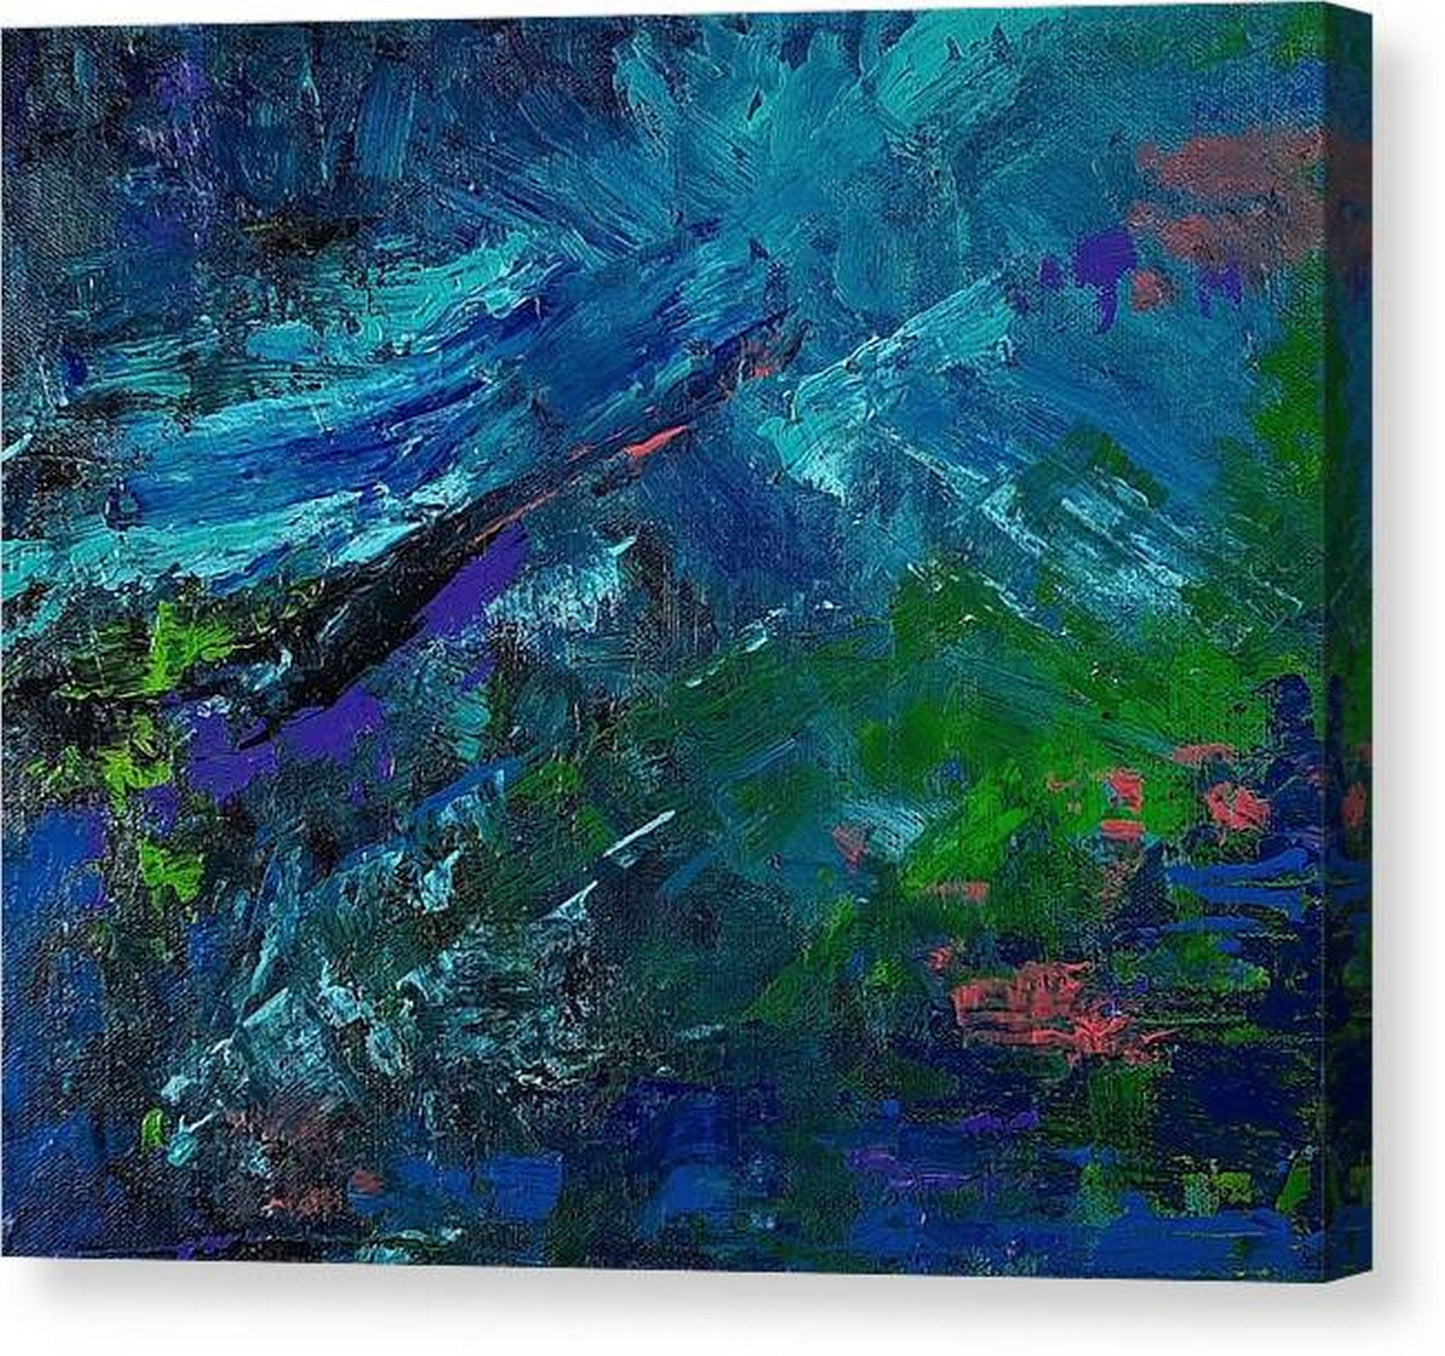 Edge view -Abstract Painting, Water lilies in a Pond